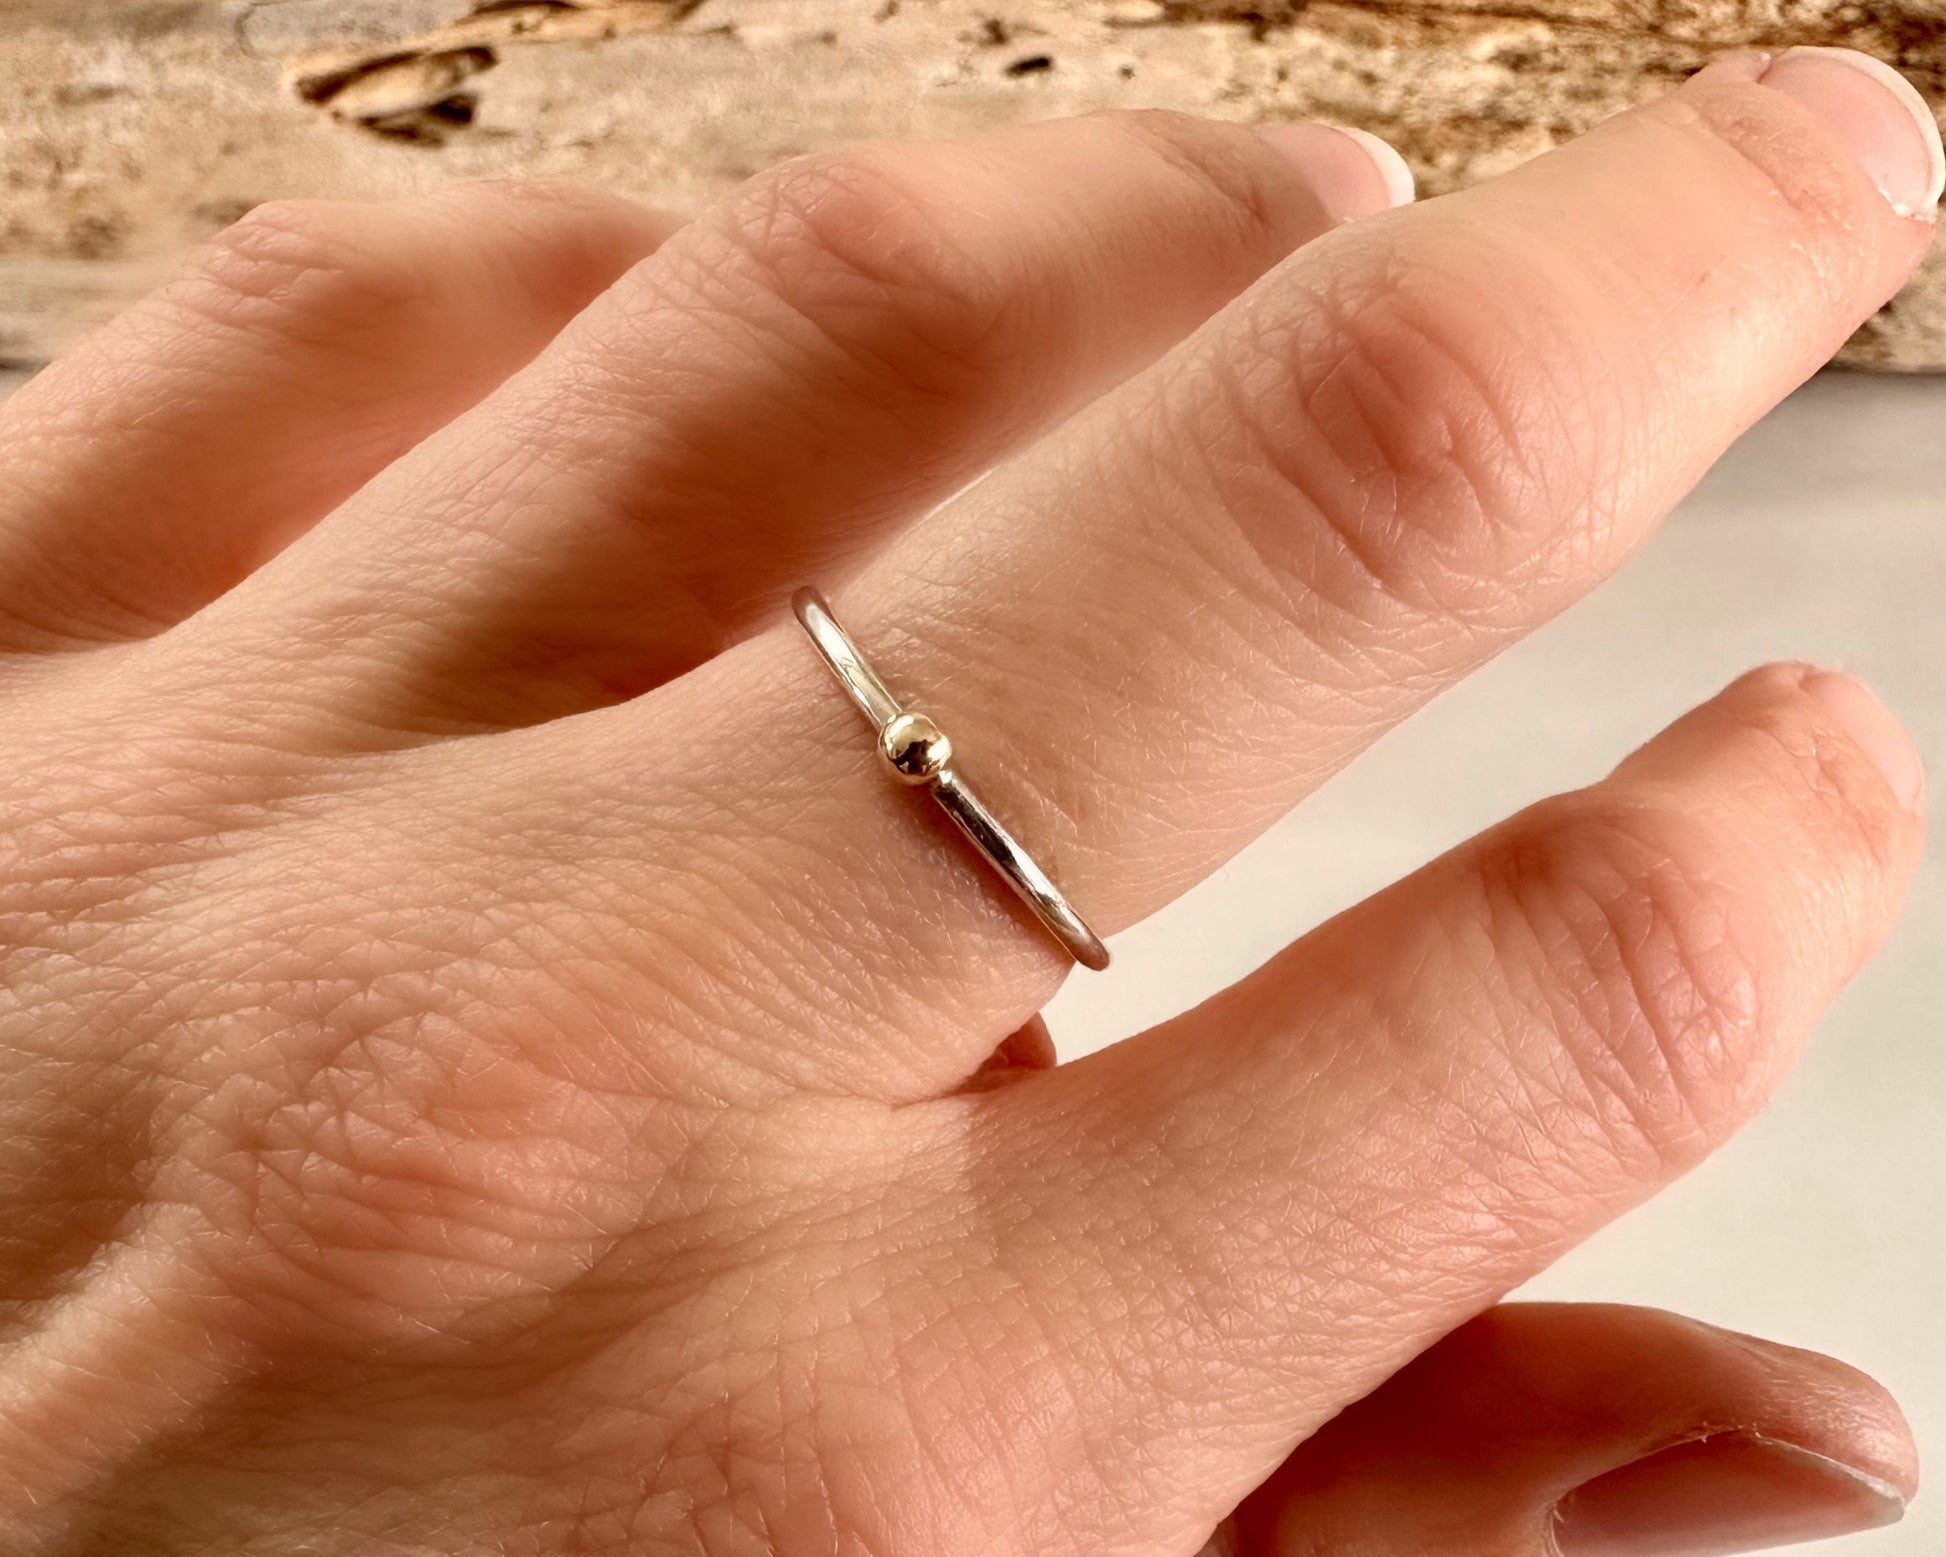 Solid Yellow Gold, Rose Gold or Silver Dot on 1.3mm 925 Sterling Silver Ring Band, Pebble Ring, Mixed Metal Recycled Stacking Ring.